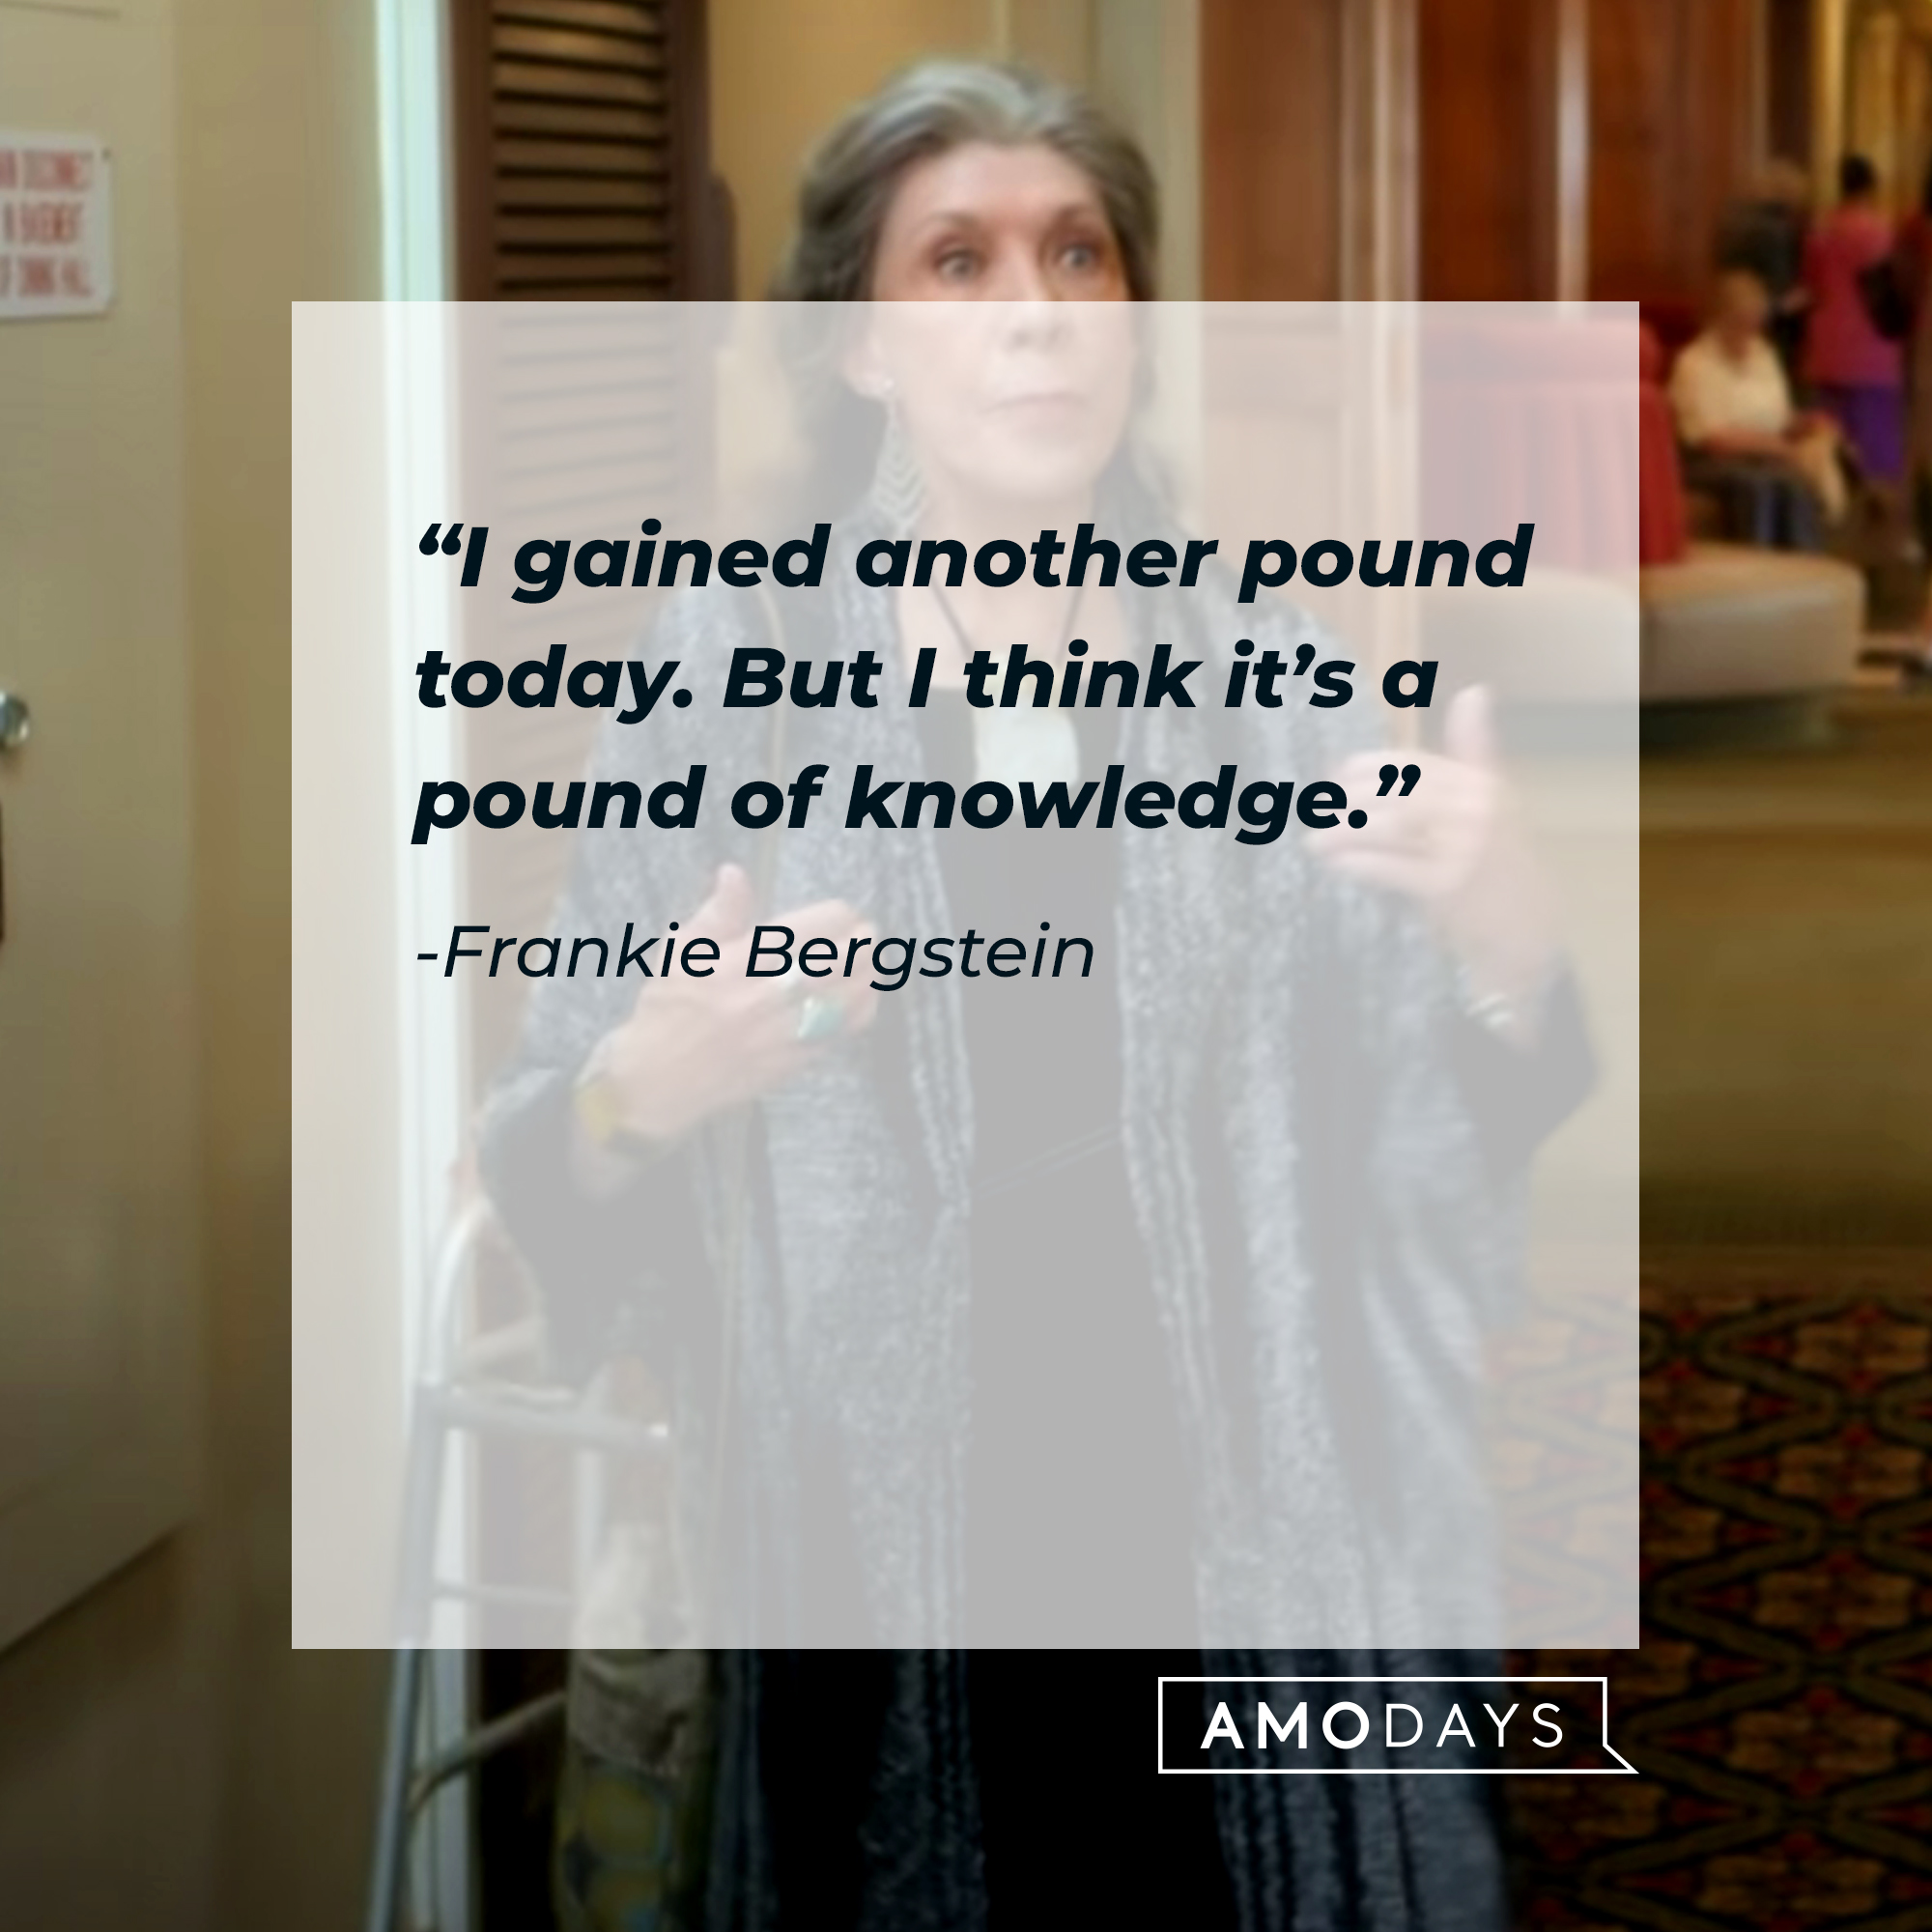 Frankie Bergstein's quote: “I gained another pound today. But I think it’s a pound of knowledge.” | Source: youtube.com/Netflix